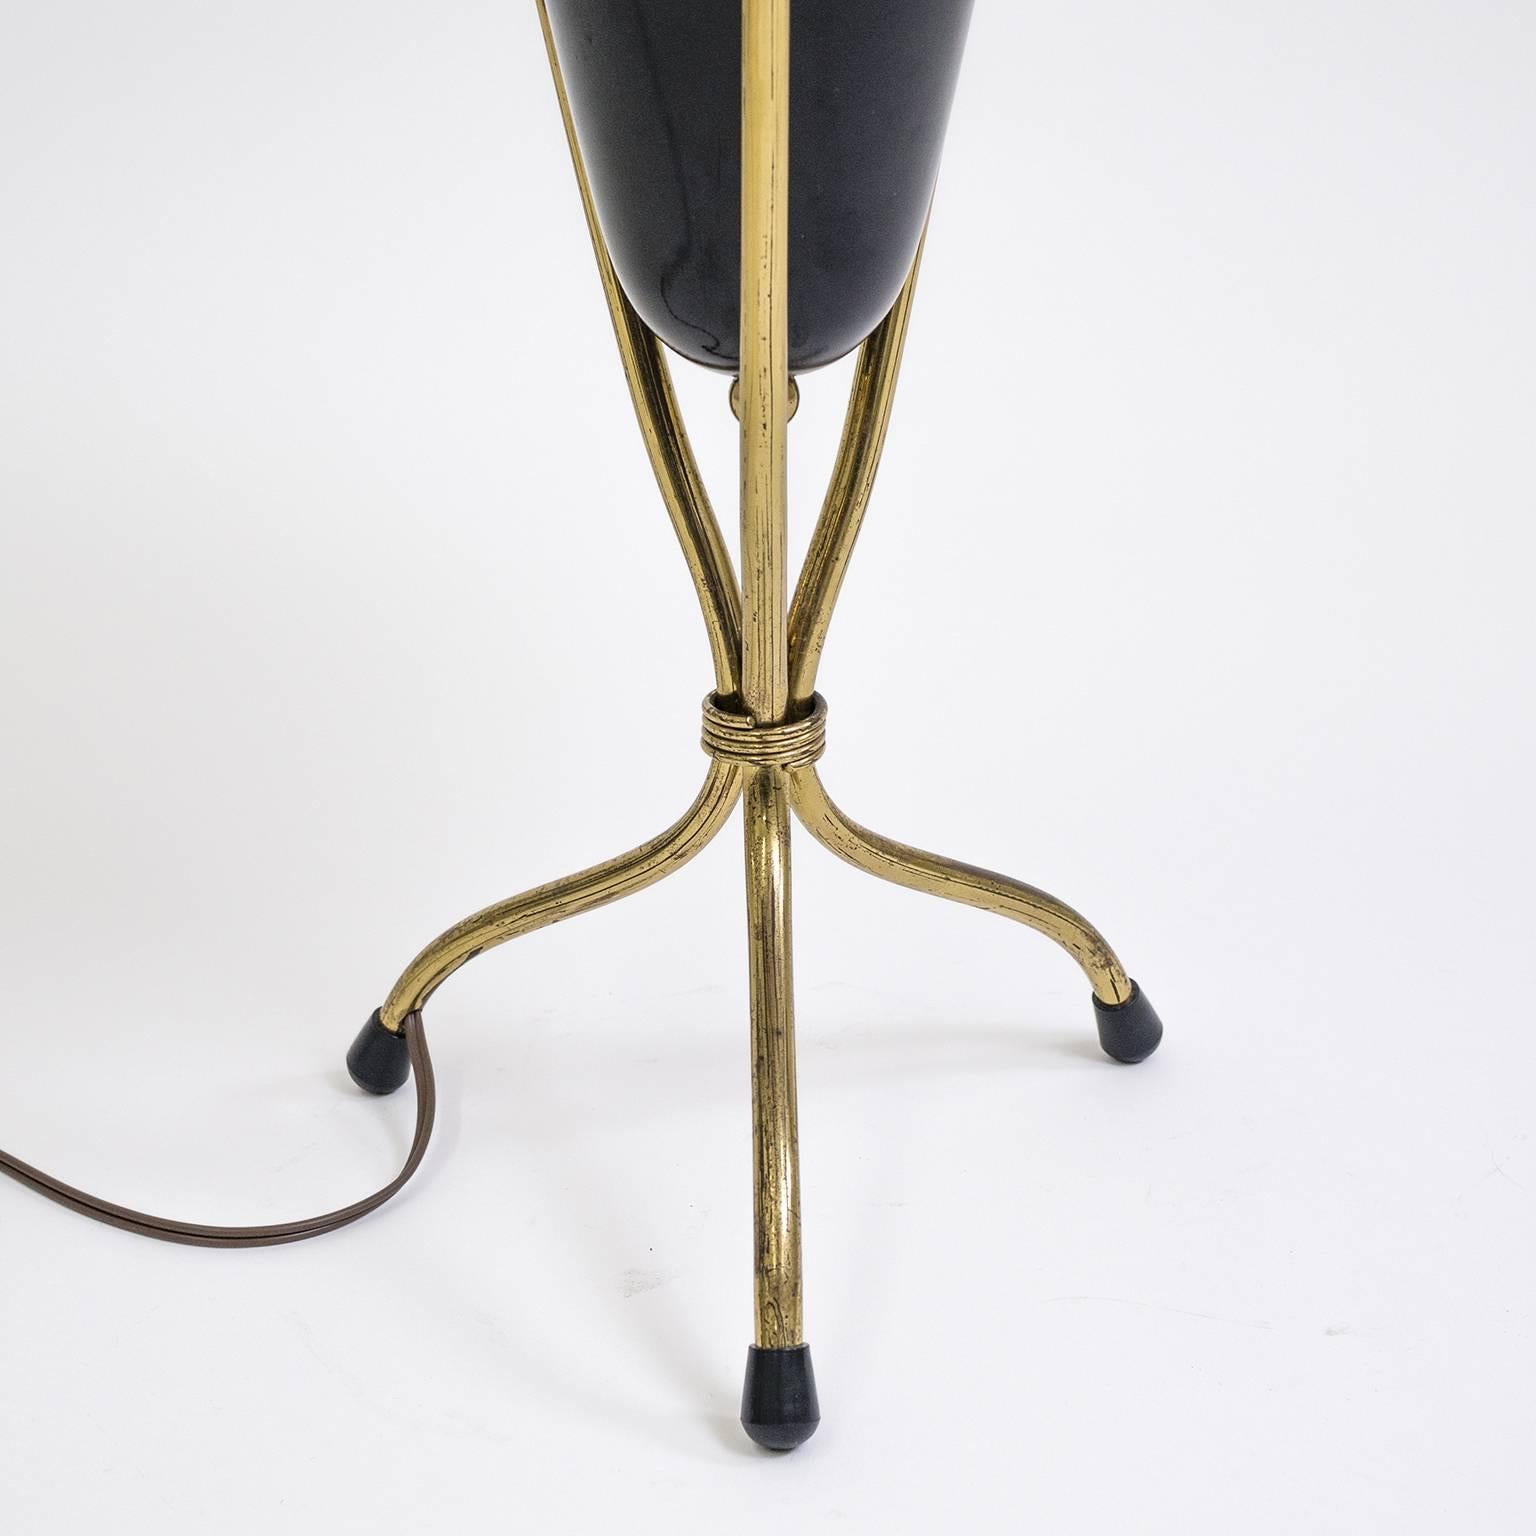 Mid-20th Century Italian Brass and Lacquered Tripod Table Lamp, 1950s